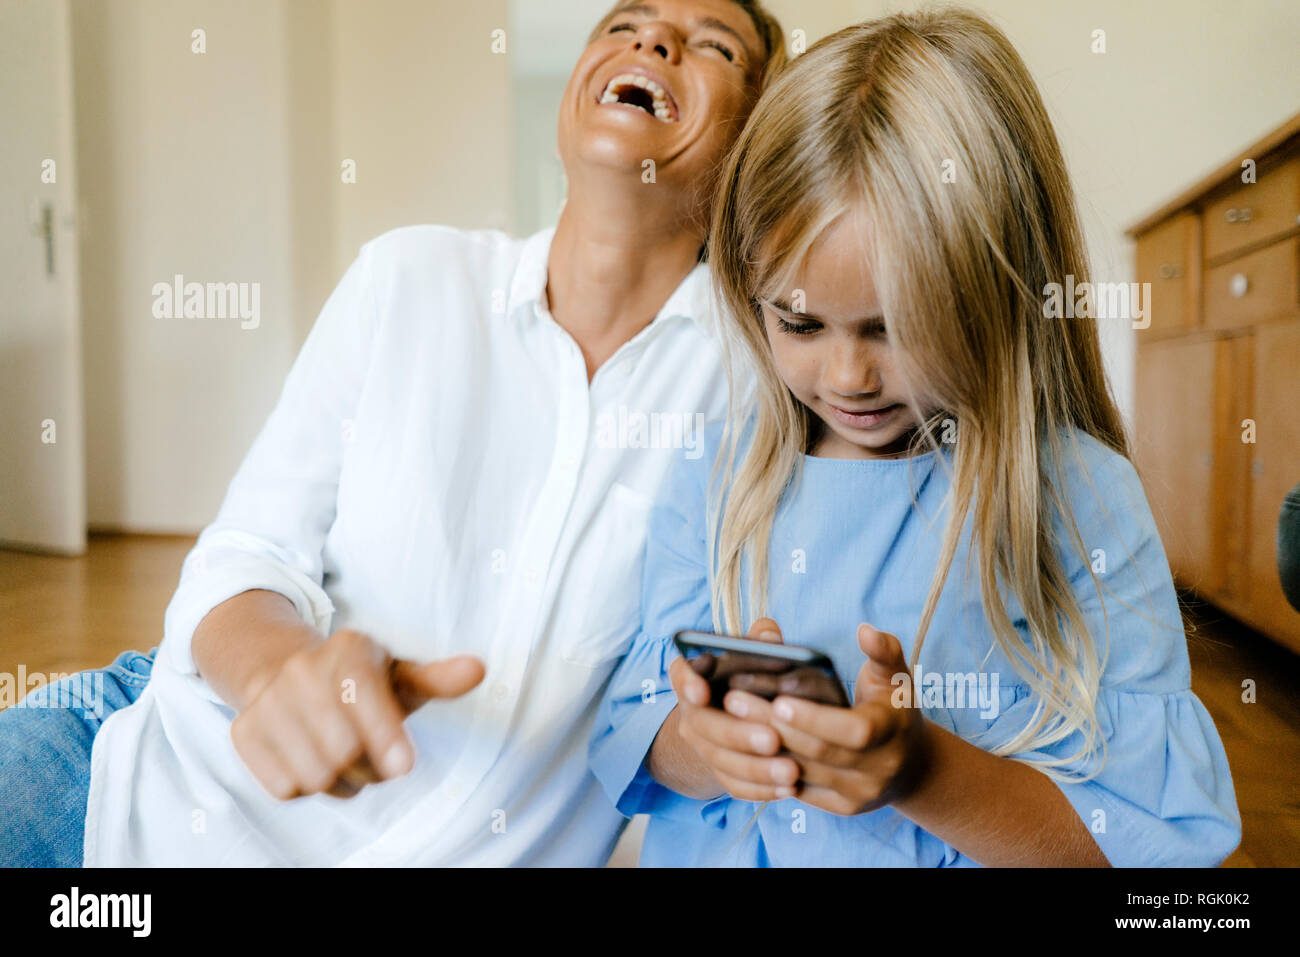 Laughing mother and daughter looking at smartphone Stock Photo